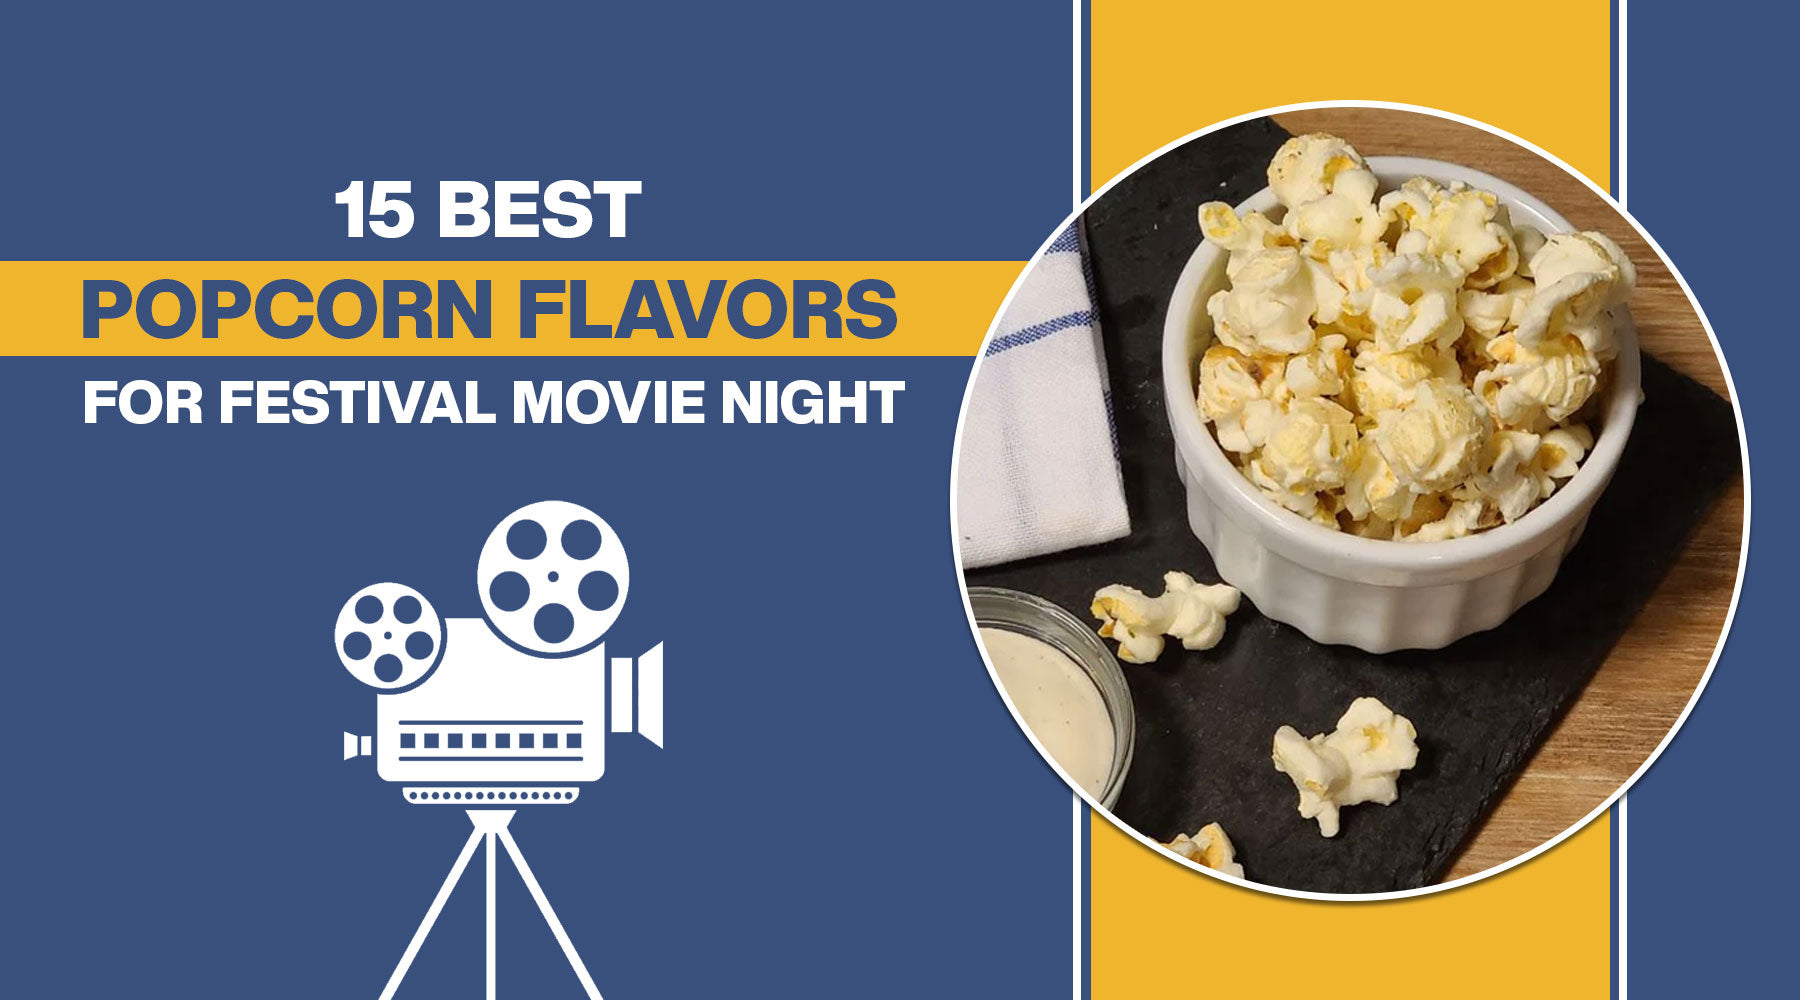 15 Best Popcorn Flavors for Holiday Movie Night